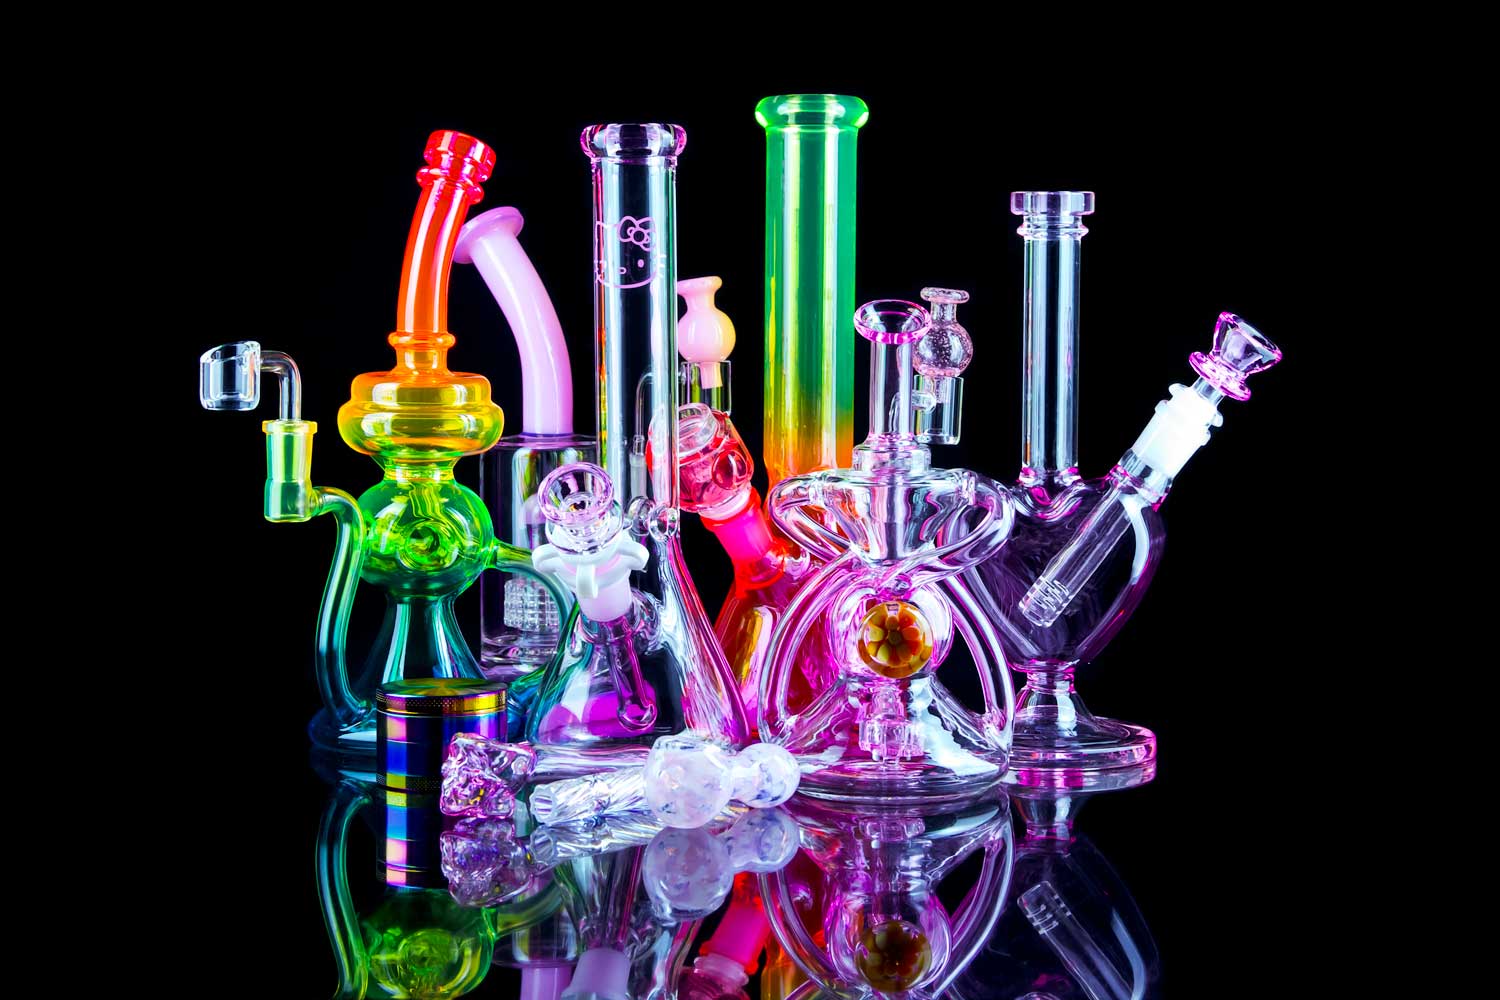 pink bongs dab rigs pipes grinders and bong bowls collection with reflection on glass